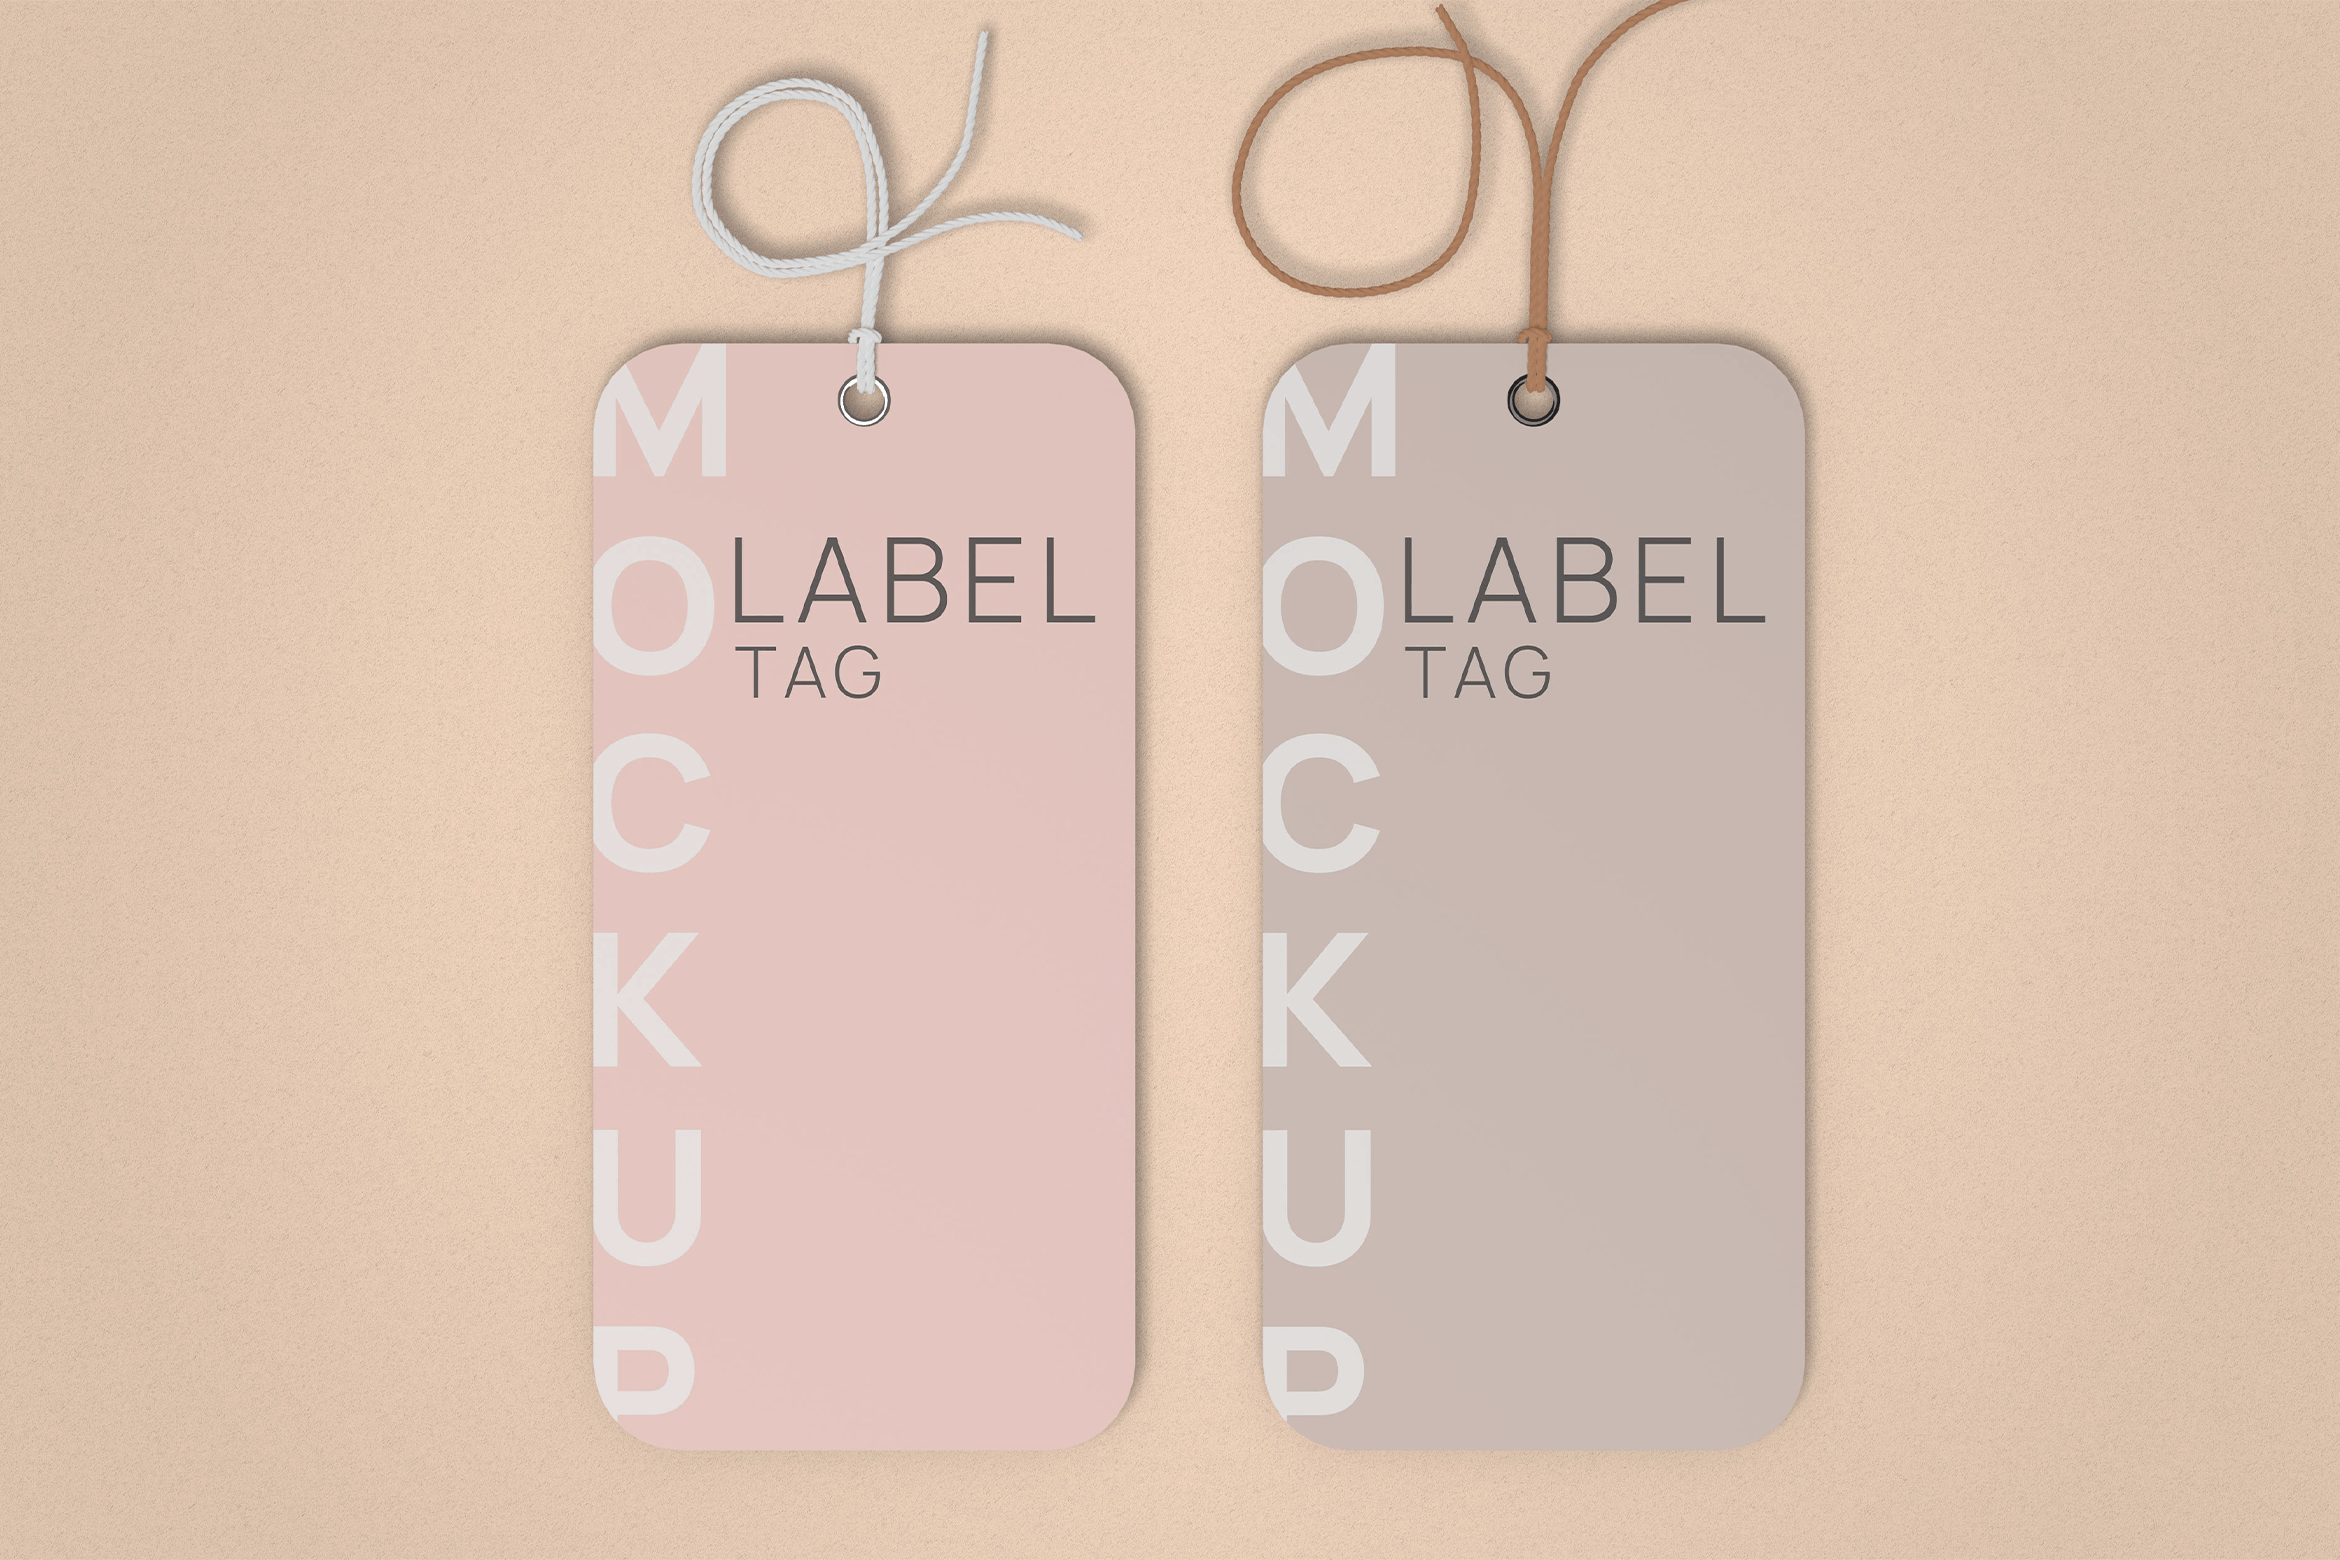 Pair Rounded Clothes Label Tag Mockup Top Angle Vi